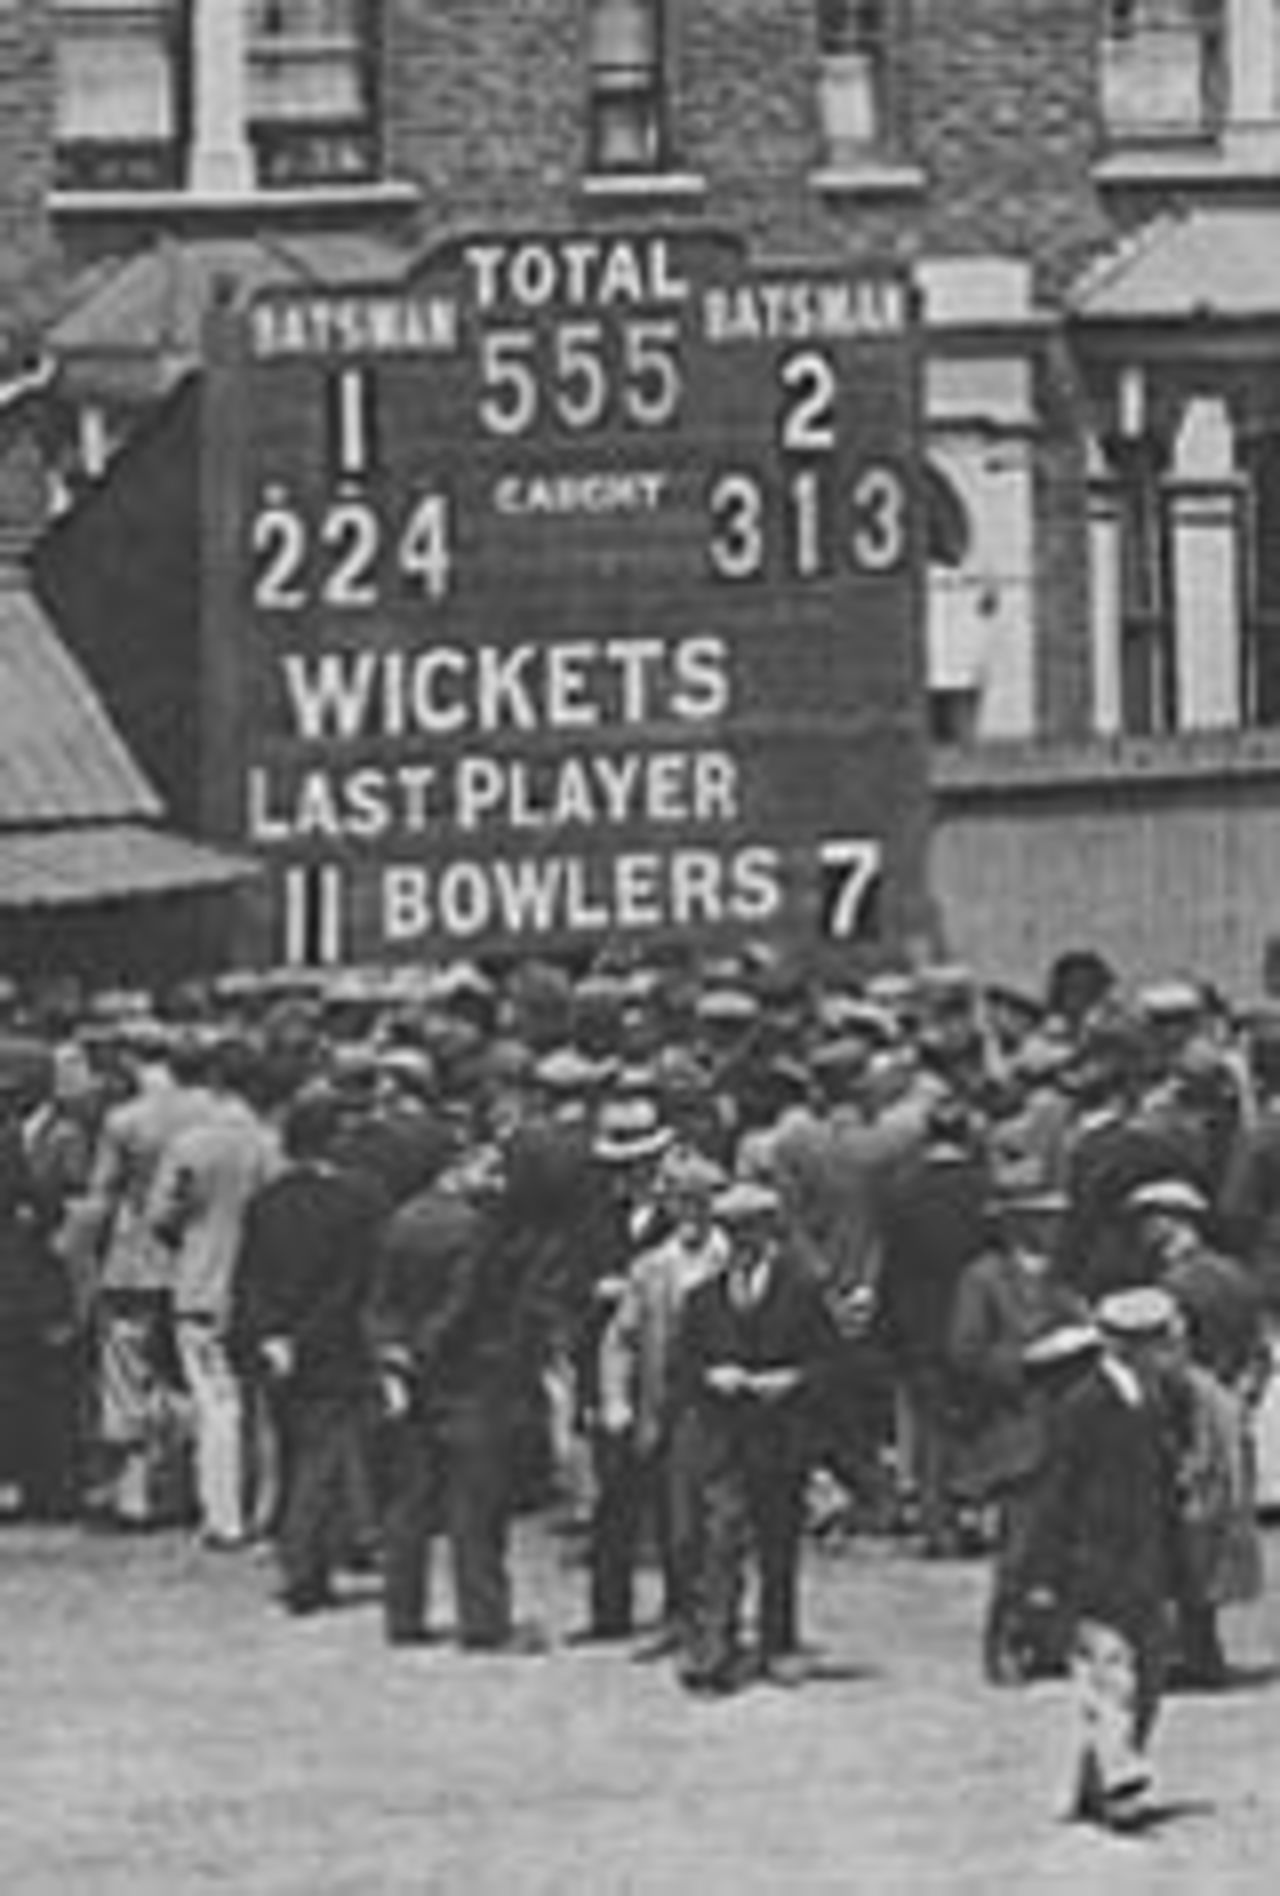 Crowds surround the scorebox after Percy Holmes and Herbert Sutcliffe's  555 first-wicket stand, Essex v Yorkshire, Leyton, June 16, 1932